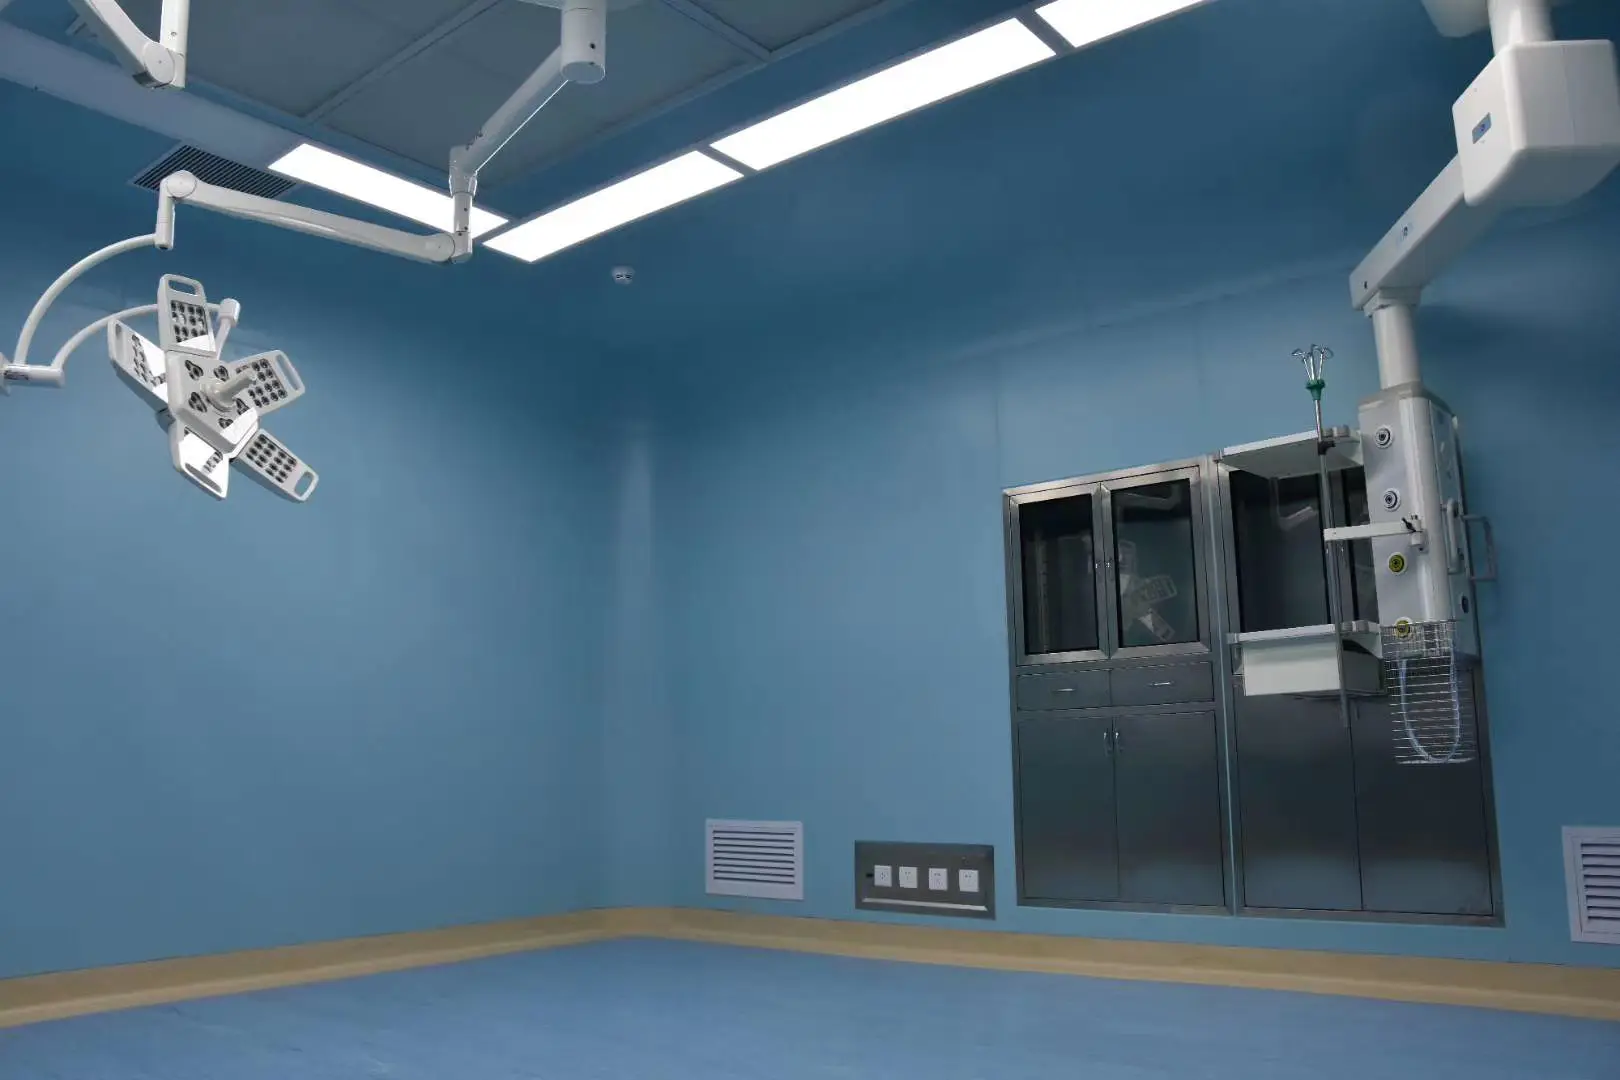 Modular OT room panel hospital clean room for operation theatre with operating room ceiling